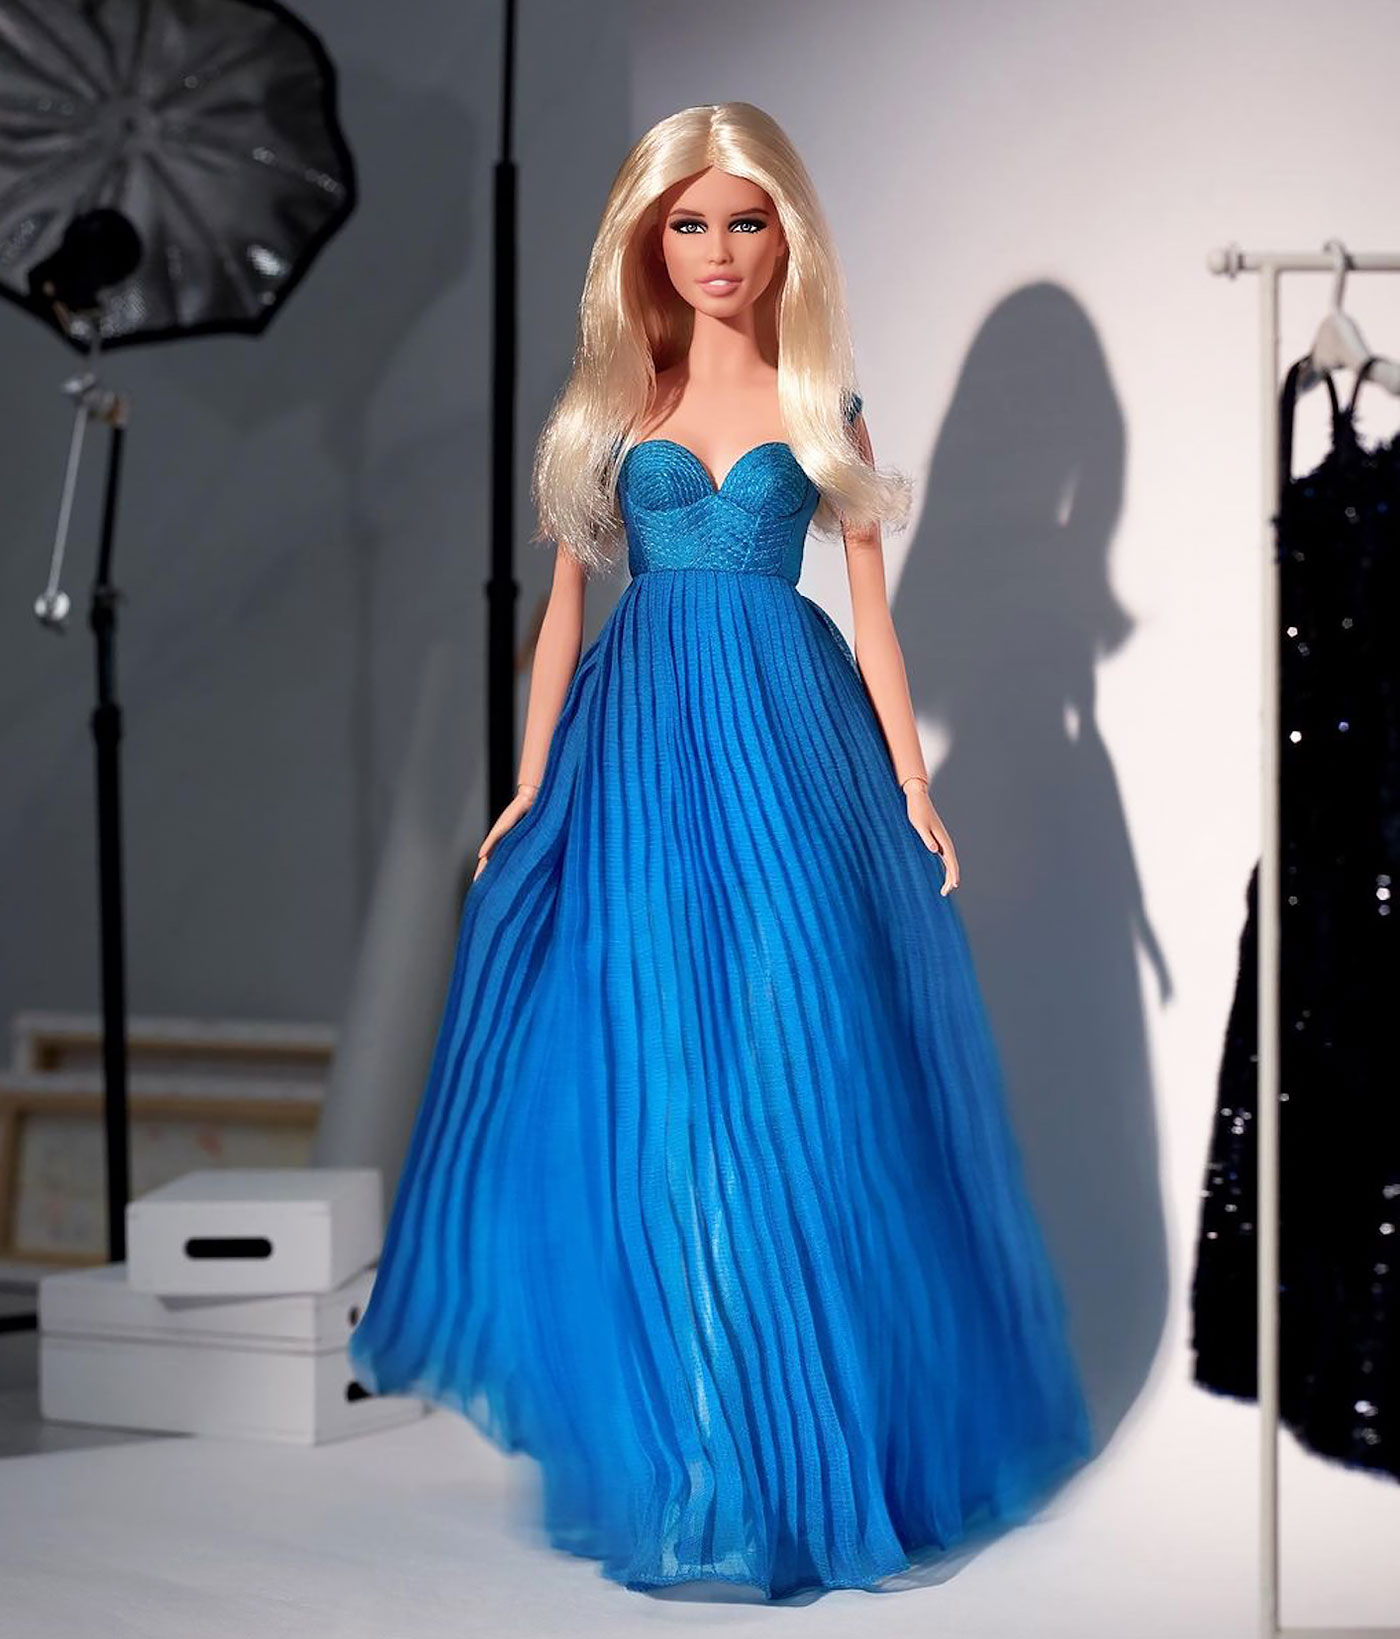 Blue Gown with Gold Stars on the Skirt Made to Fit Barbie Doll 